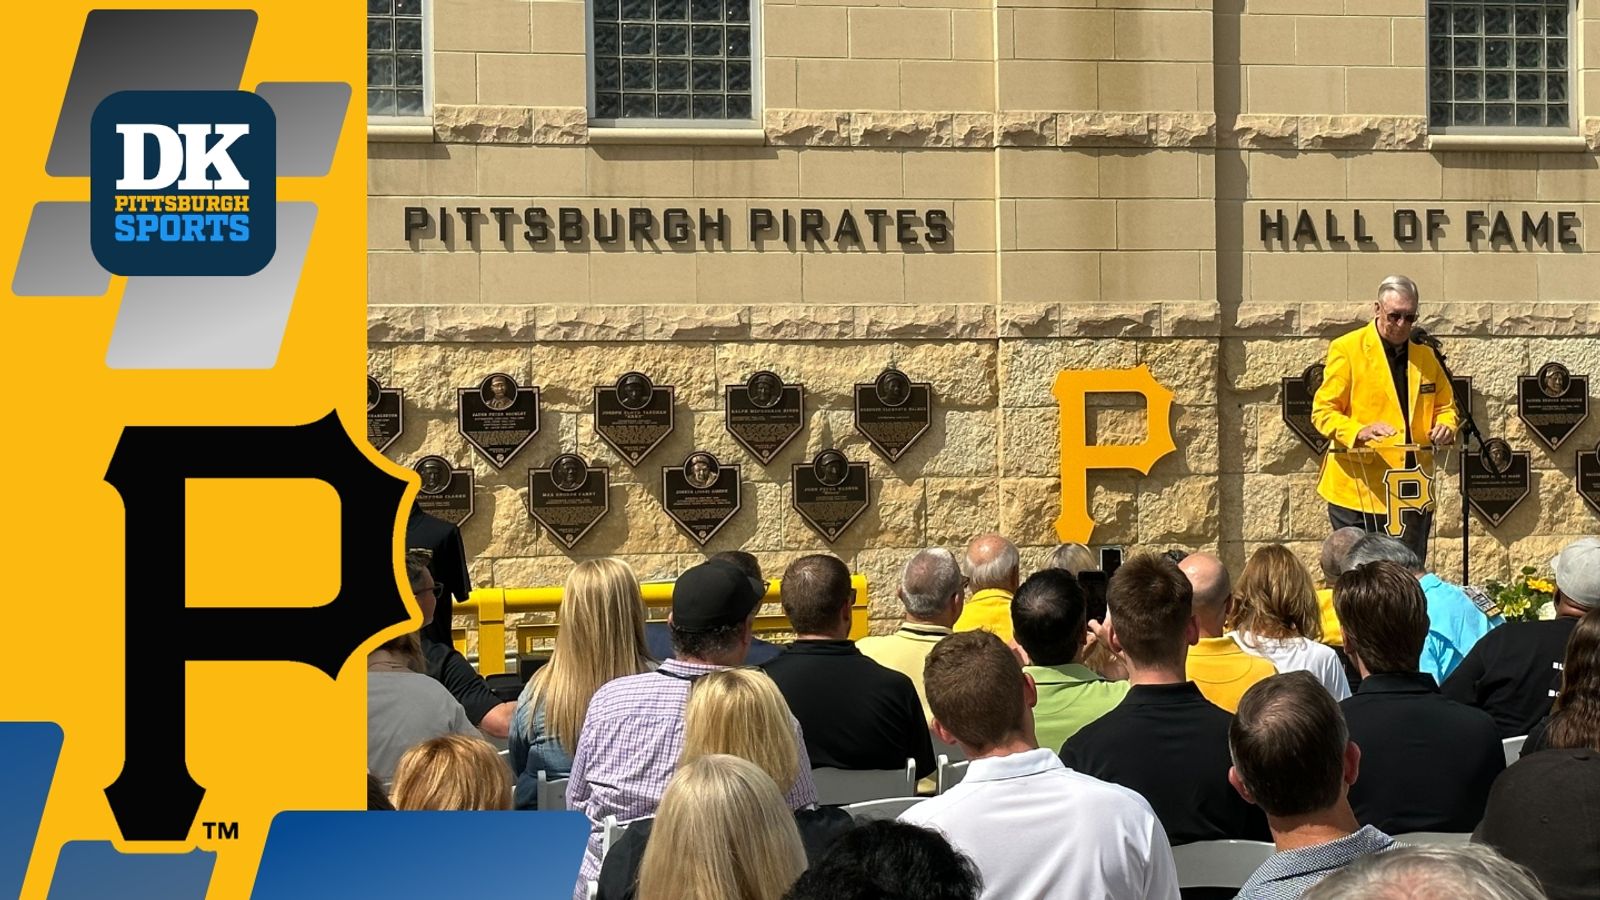 Four inducted into Pirates Hall of Fame … Skenes first Altoona start tonight ..